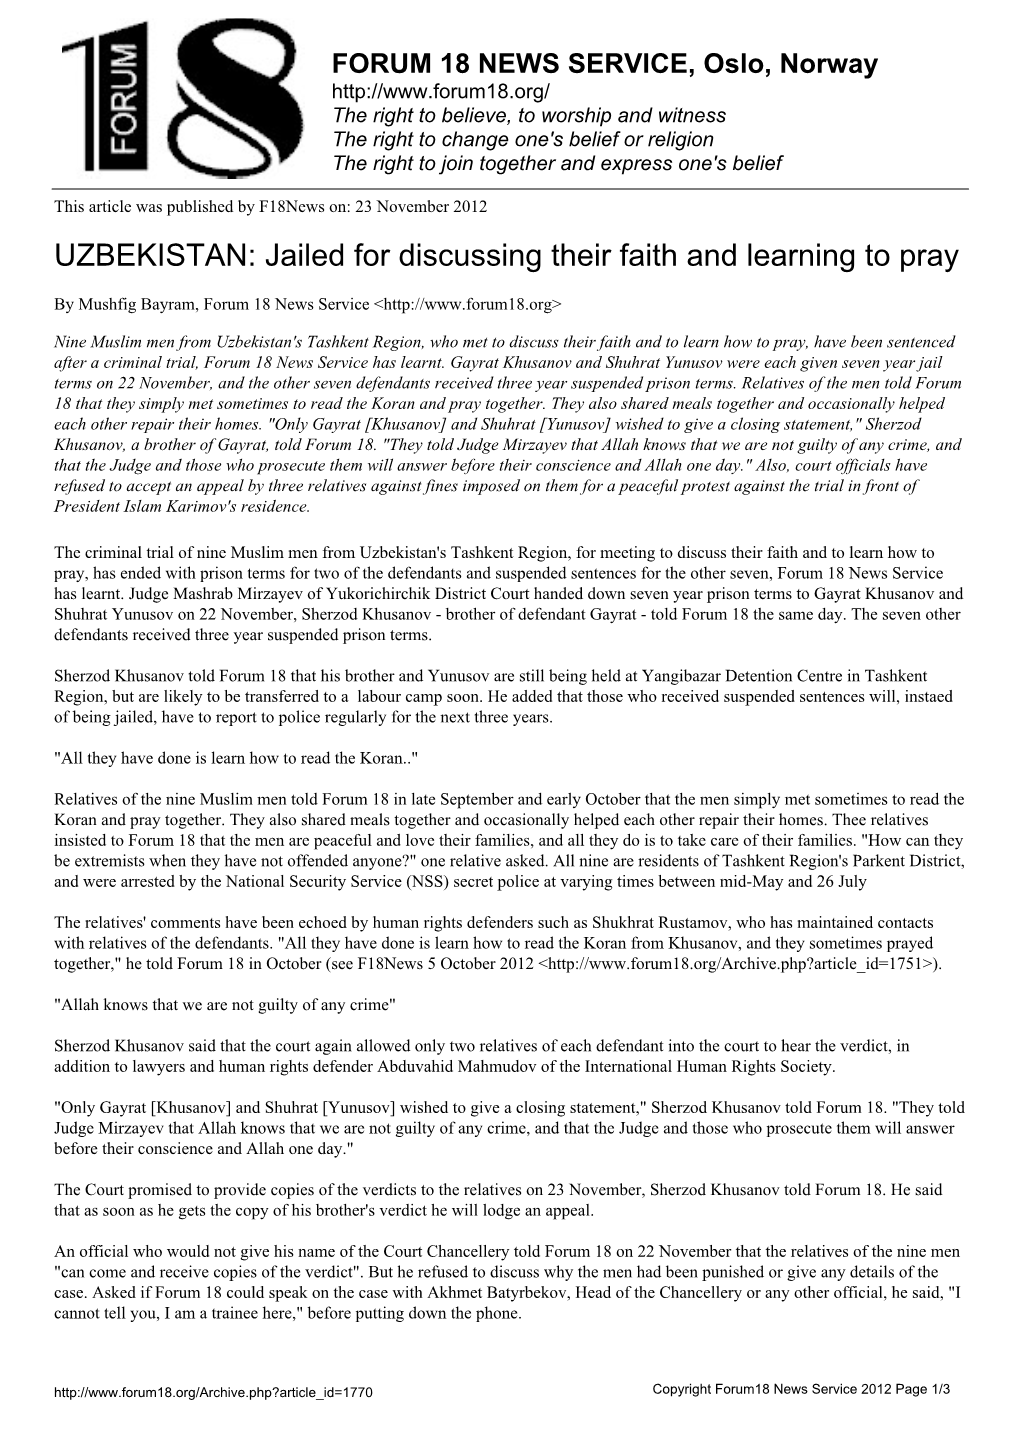 UZBEKISTAN: Jailed for Discussing Their Faith and Learning to Pray